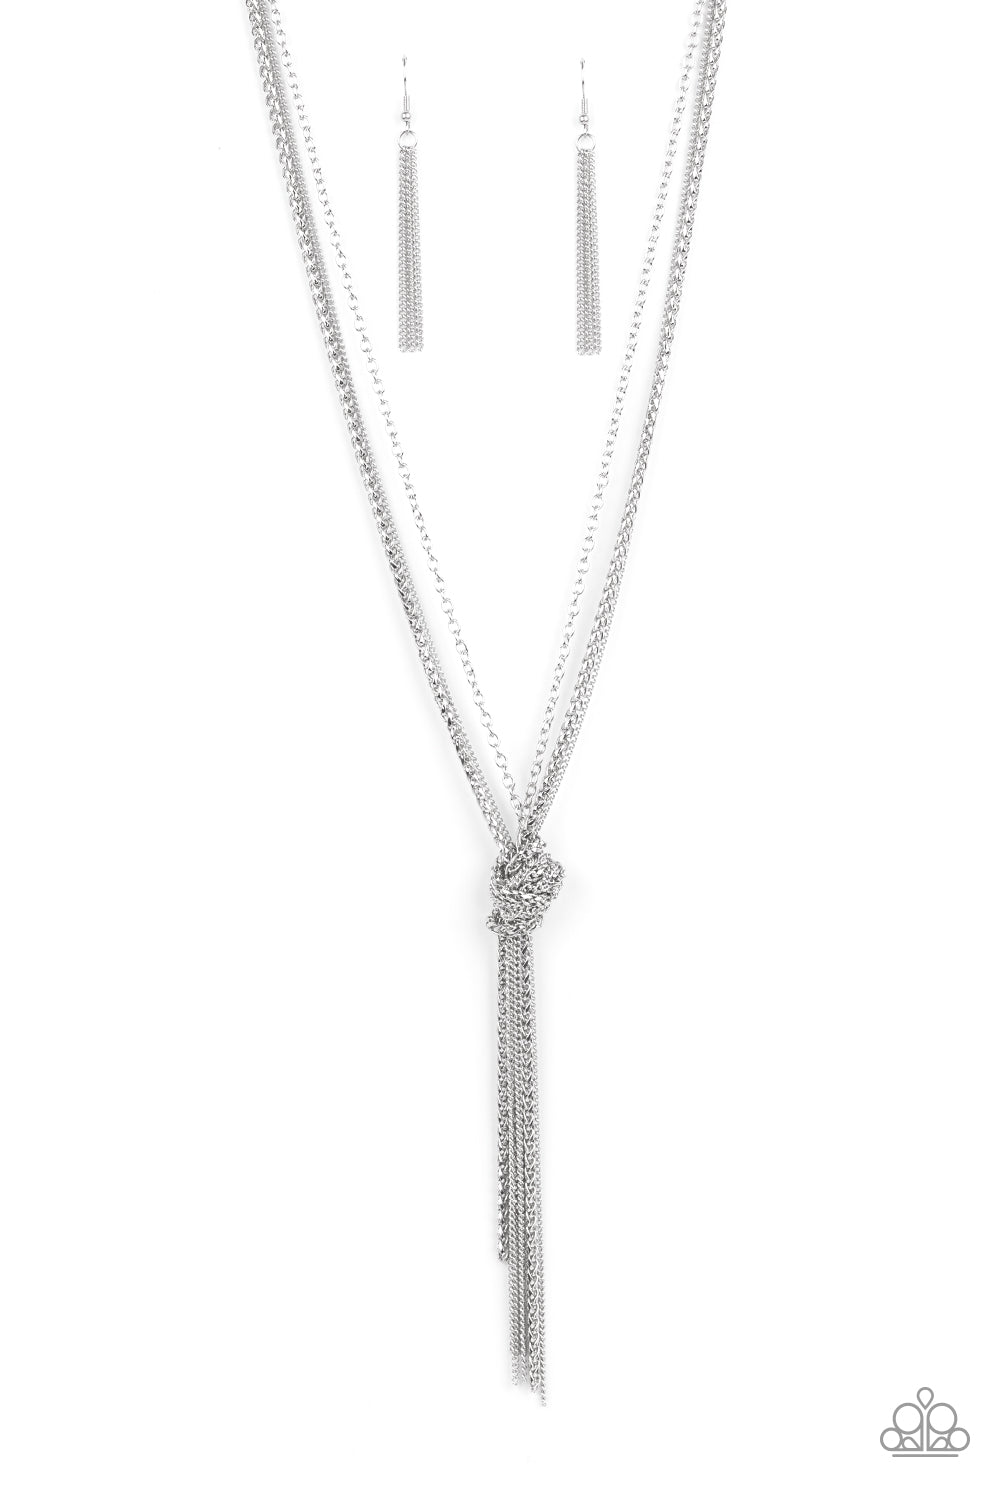 KNOT All There - Silver Necklace - Paparazzi Accessories